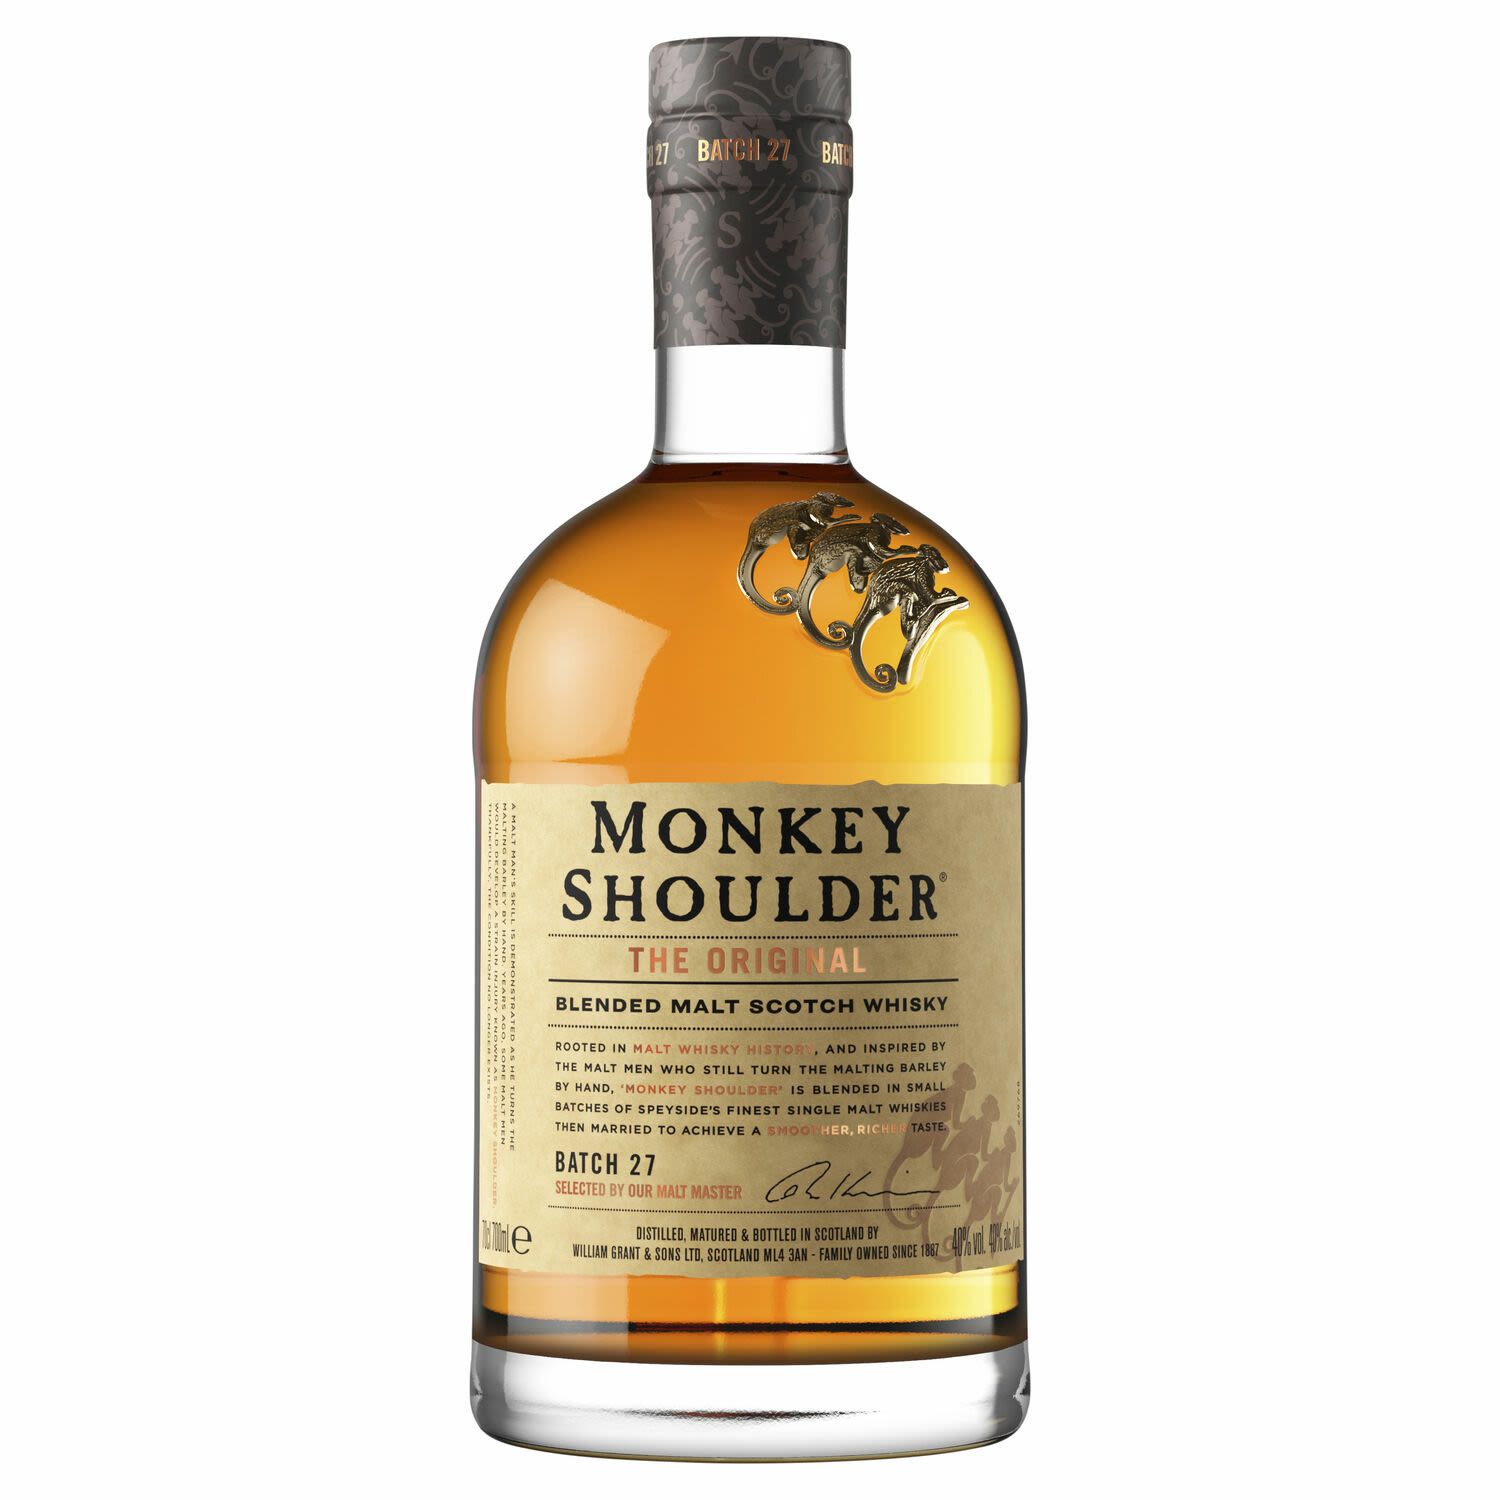 Monkey Shoulder is a premium Scotch Whisky that is steeped in history and culture and to this day is still tended by hand by the experienced Malt Men of Speyside. A smooth and rich 'triple' malt Scotch (a world first!) that has been blended from three of Speyside's finest single malts and using batches from only 27 casks to produce this fine malt whisky. A delightful nose of sherry, cinnamon baked pear, butterscotch, barley, strawberry and Bourbon vanilla which are all complemented by tangy, sweet nut, citrus, mint, oak and orange peel flavours.<br /> <br />Alcohol Volume: 40.00%<br /><br />Pack Format: Bottle<br /><br />Standard Drinks: 22</br /><br />Pack Type: Bottle<br /><br />Country of Origin: Scotland<br />